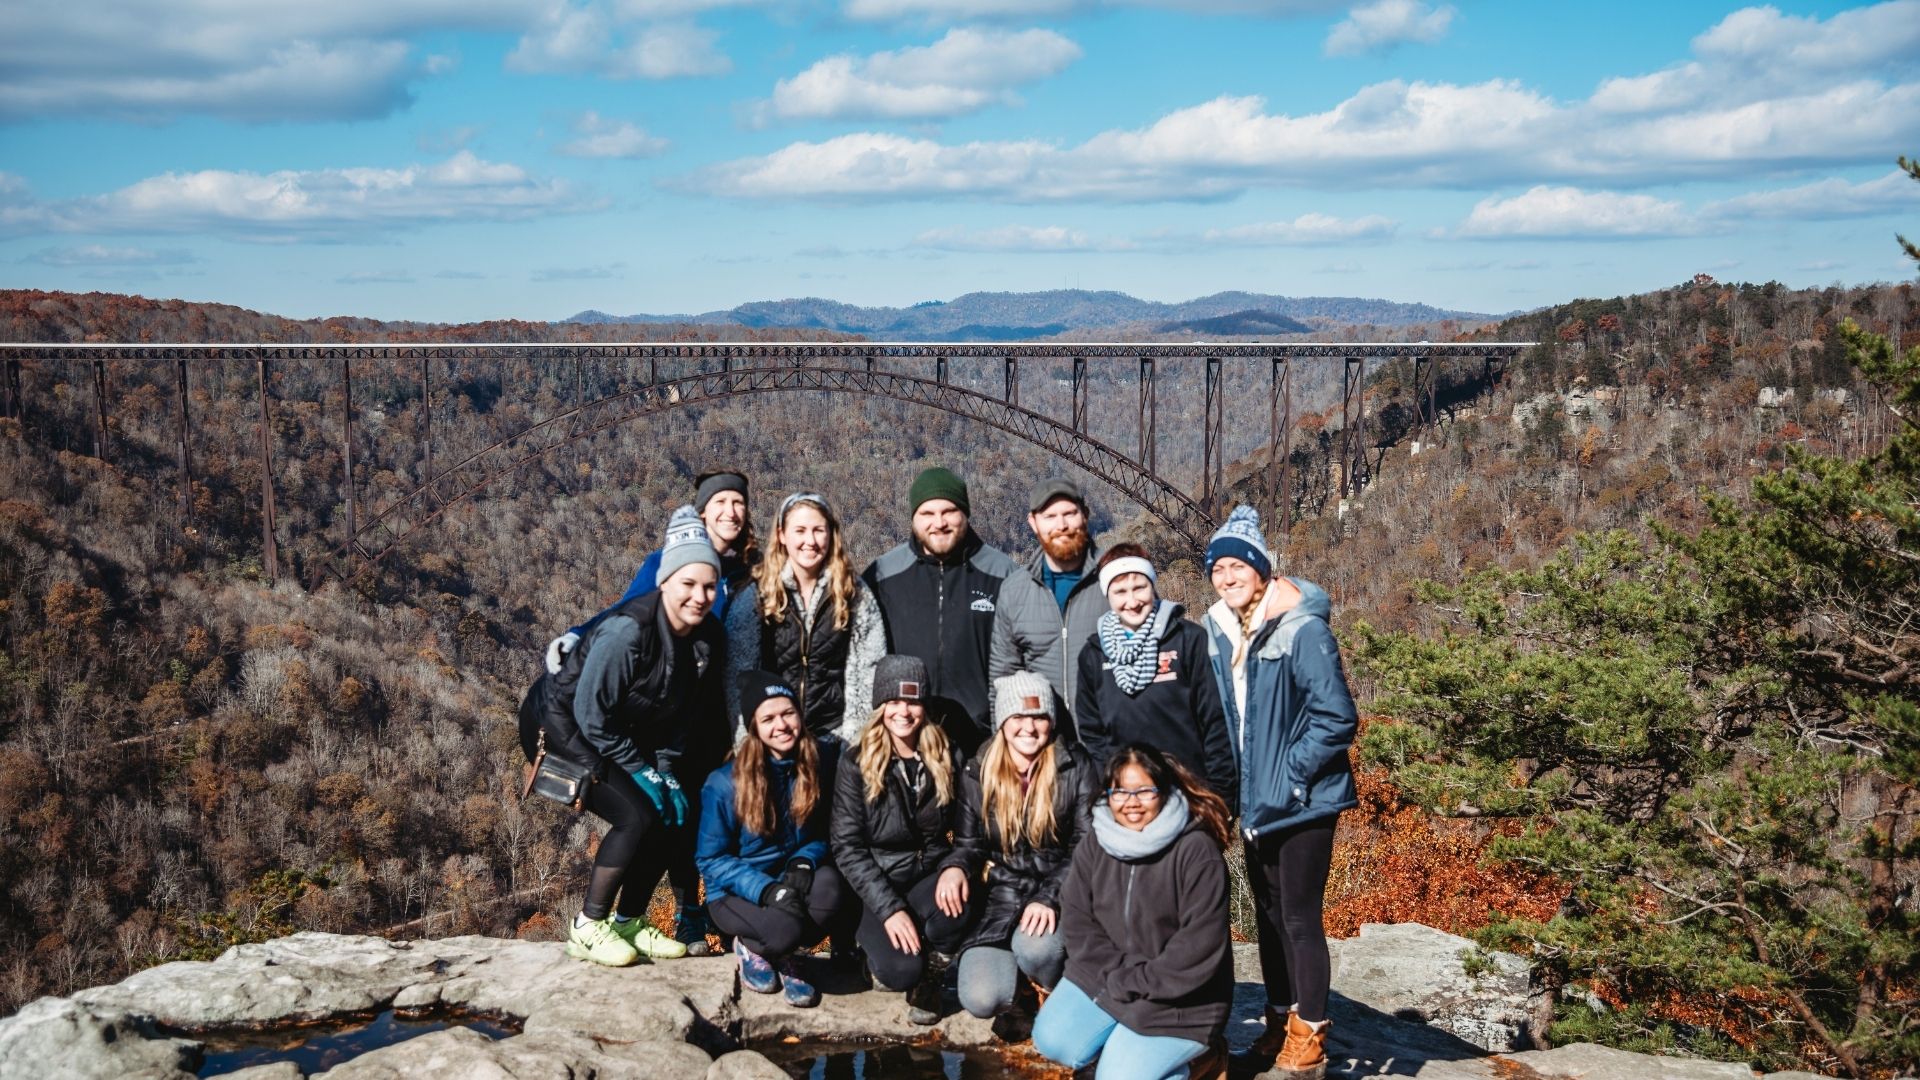 Cohort two fellows group photo in front of the New River Gorge bridge